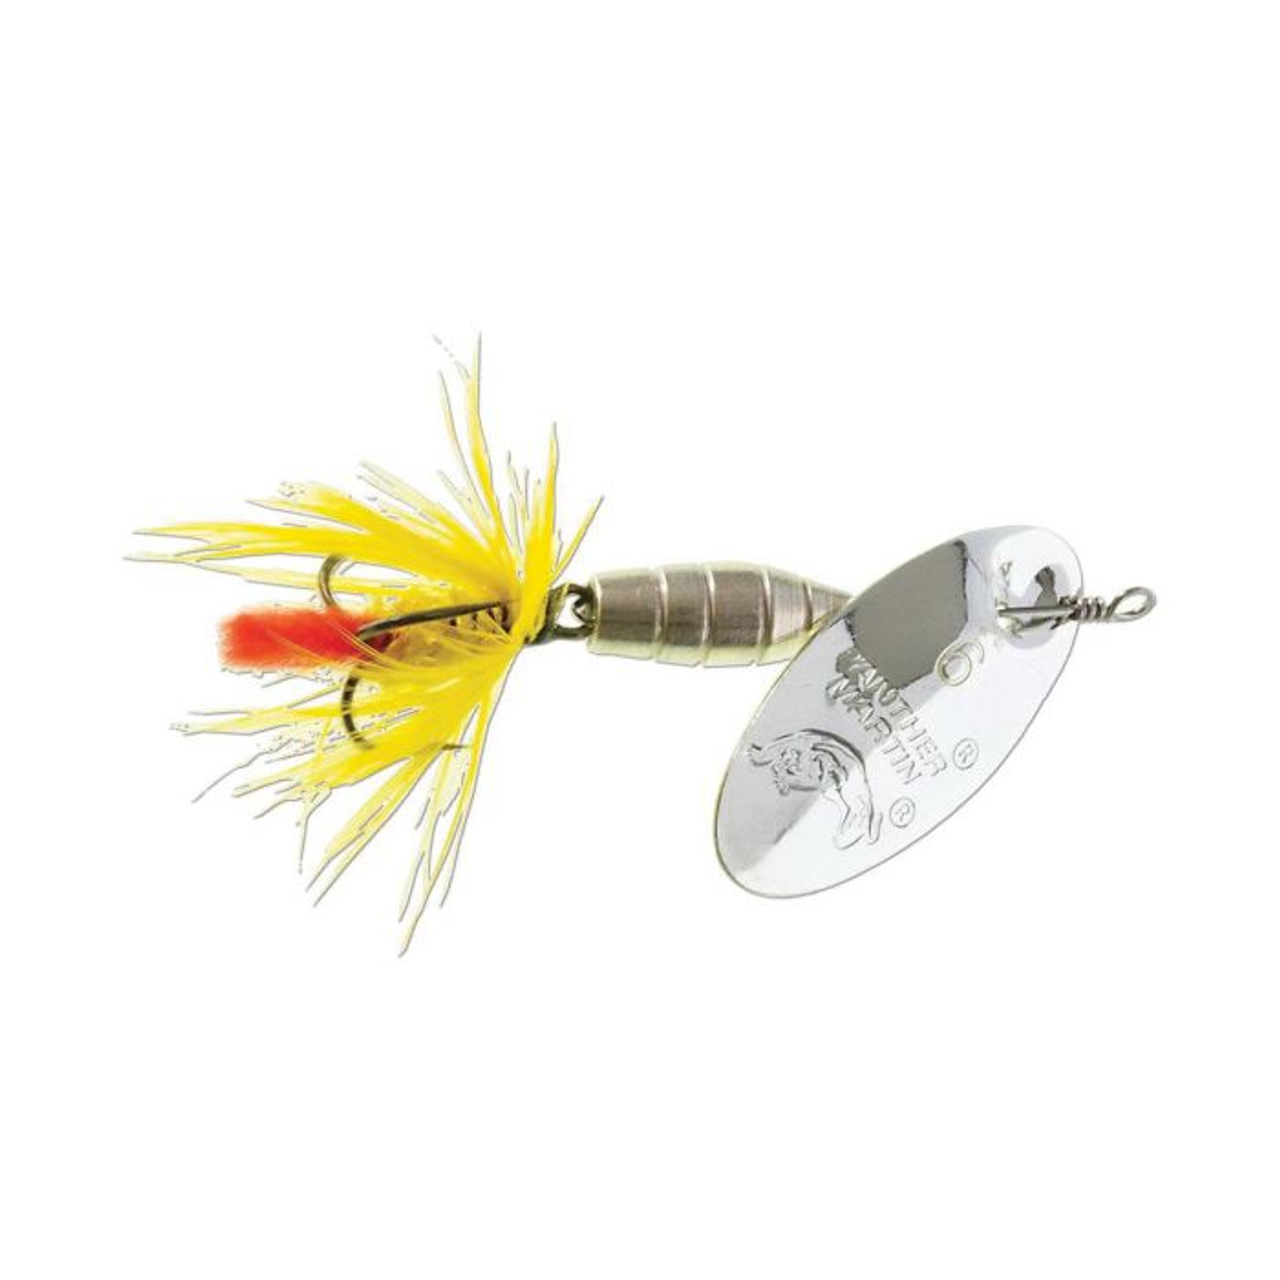 Panther Martin Fly Silver/Yellow 1/8 oz.